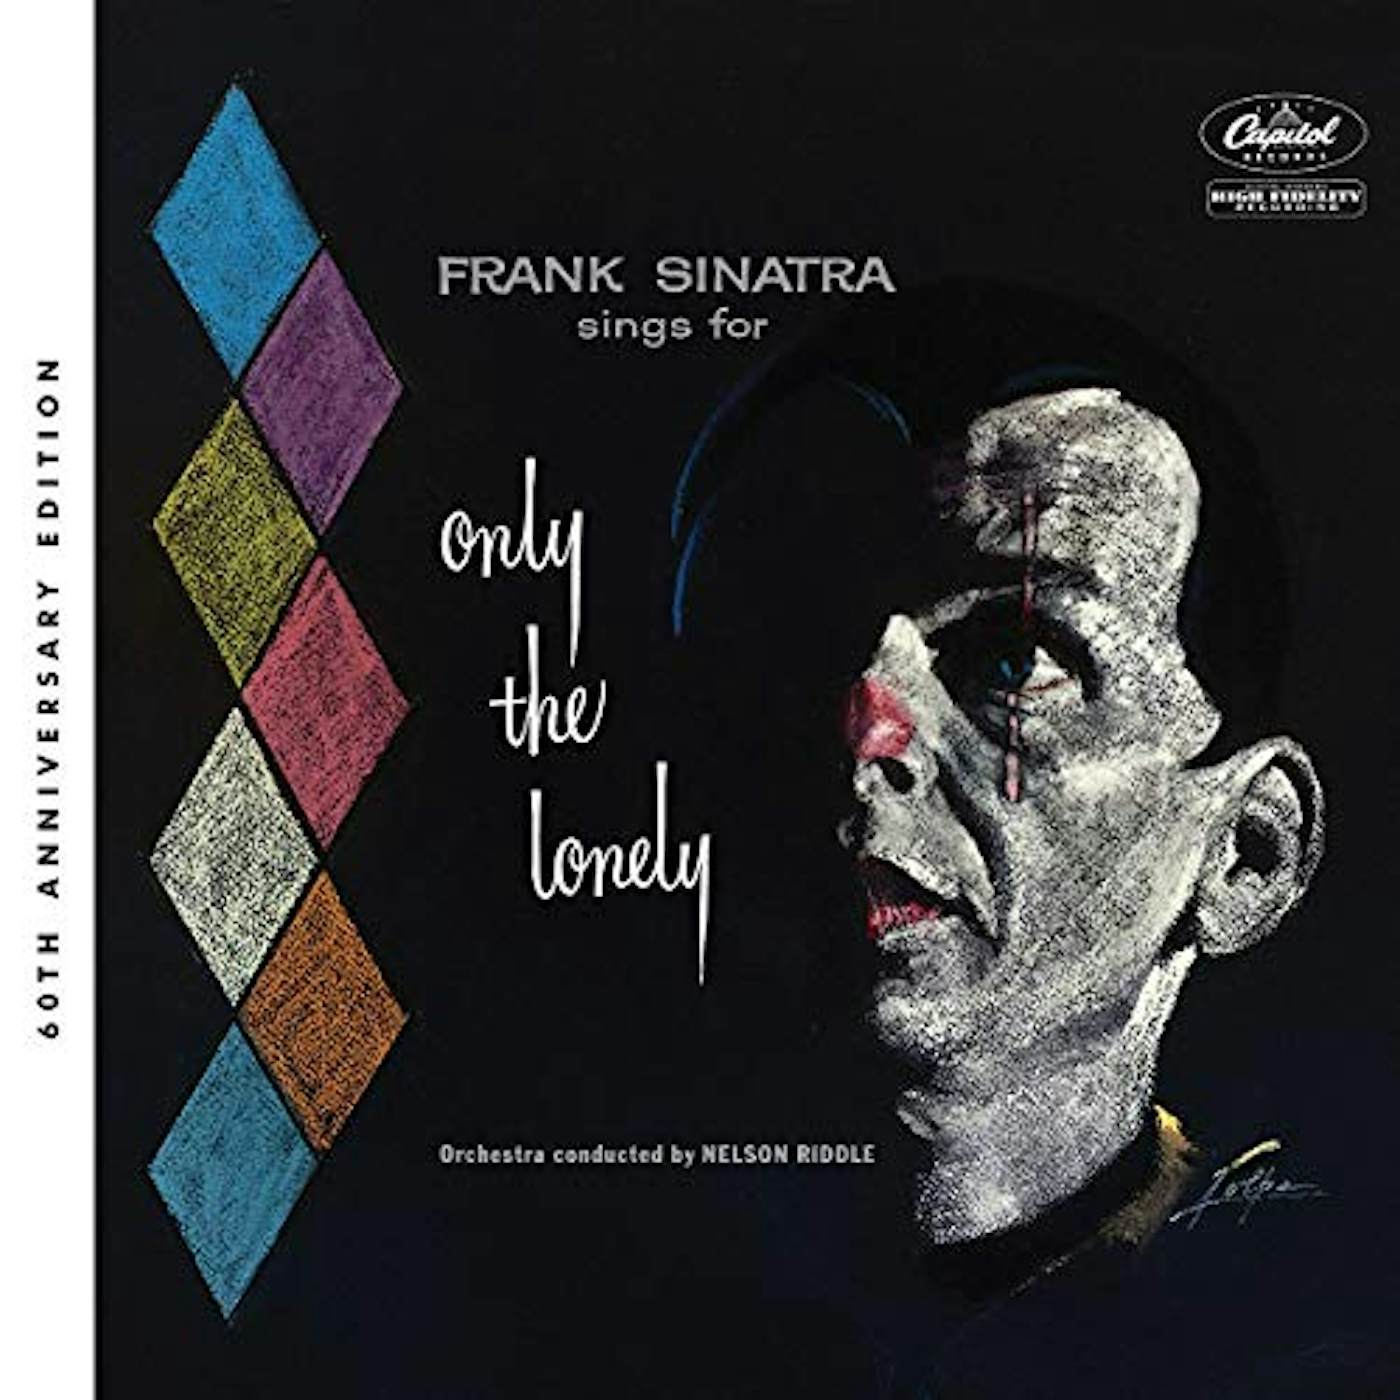 Frank Sinatra SINGS FOR ONLY THE LONELY (60TH ANNIVERSARY MIX) CD